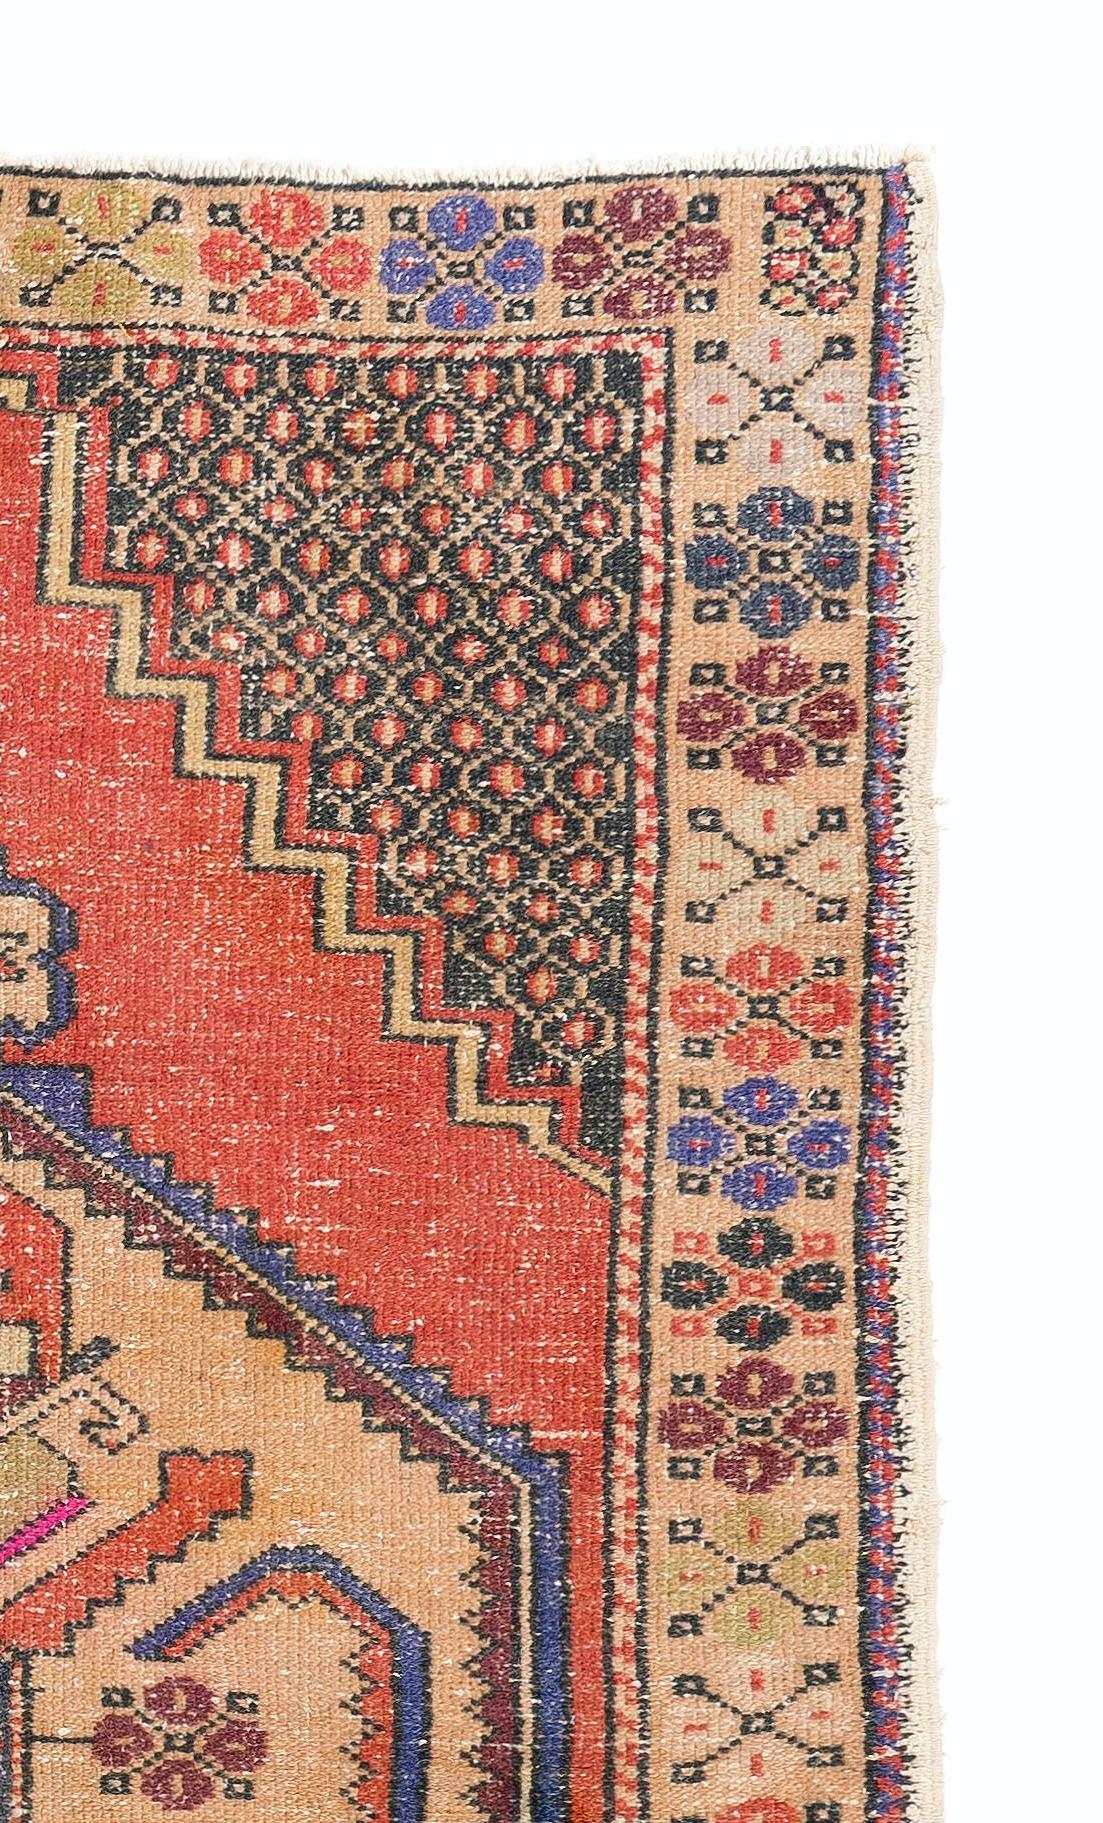 Hand-Knotted 3.7x6.3 Ft Vintage Turkish Accent Rug in Red, Circa 1955, Wool Floor Covering For Sale